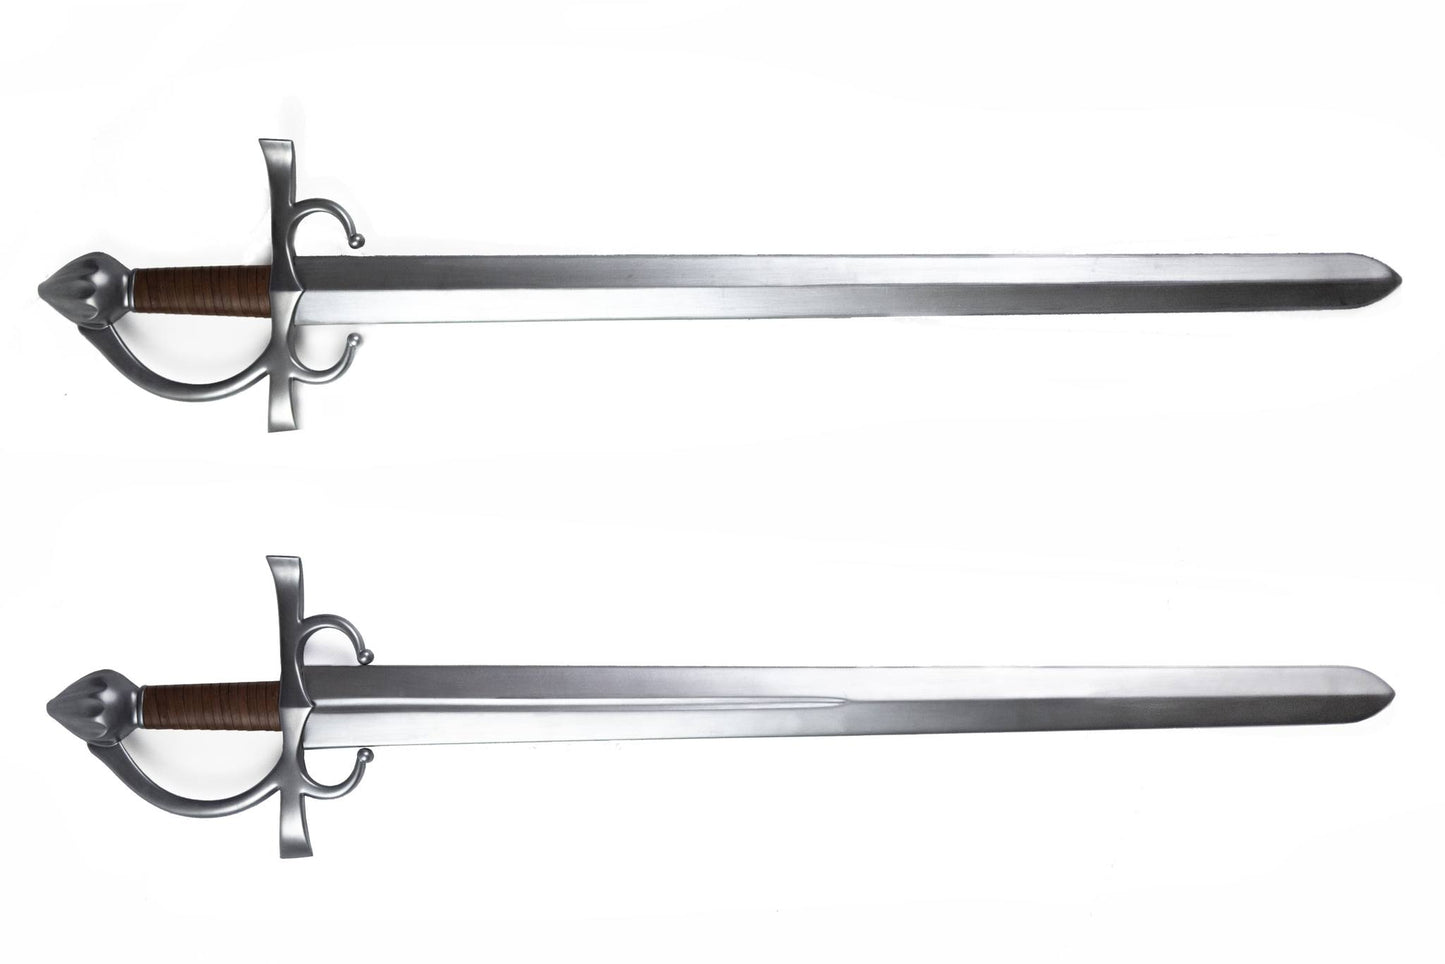 Sidesword - one-handed sword